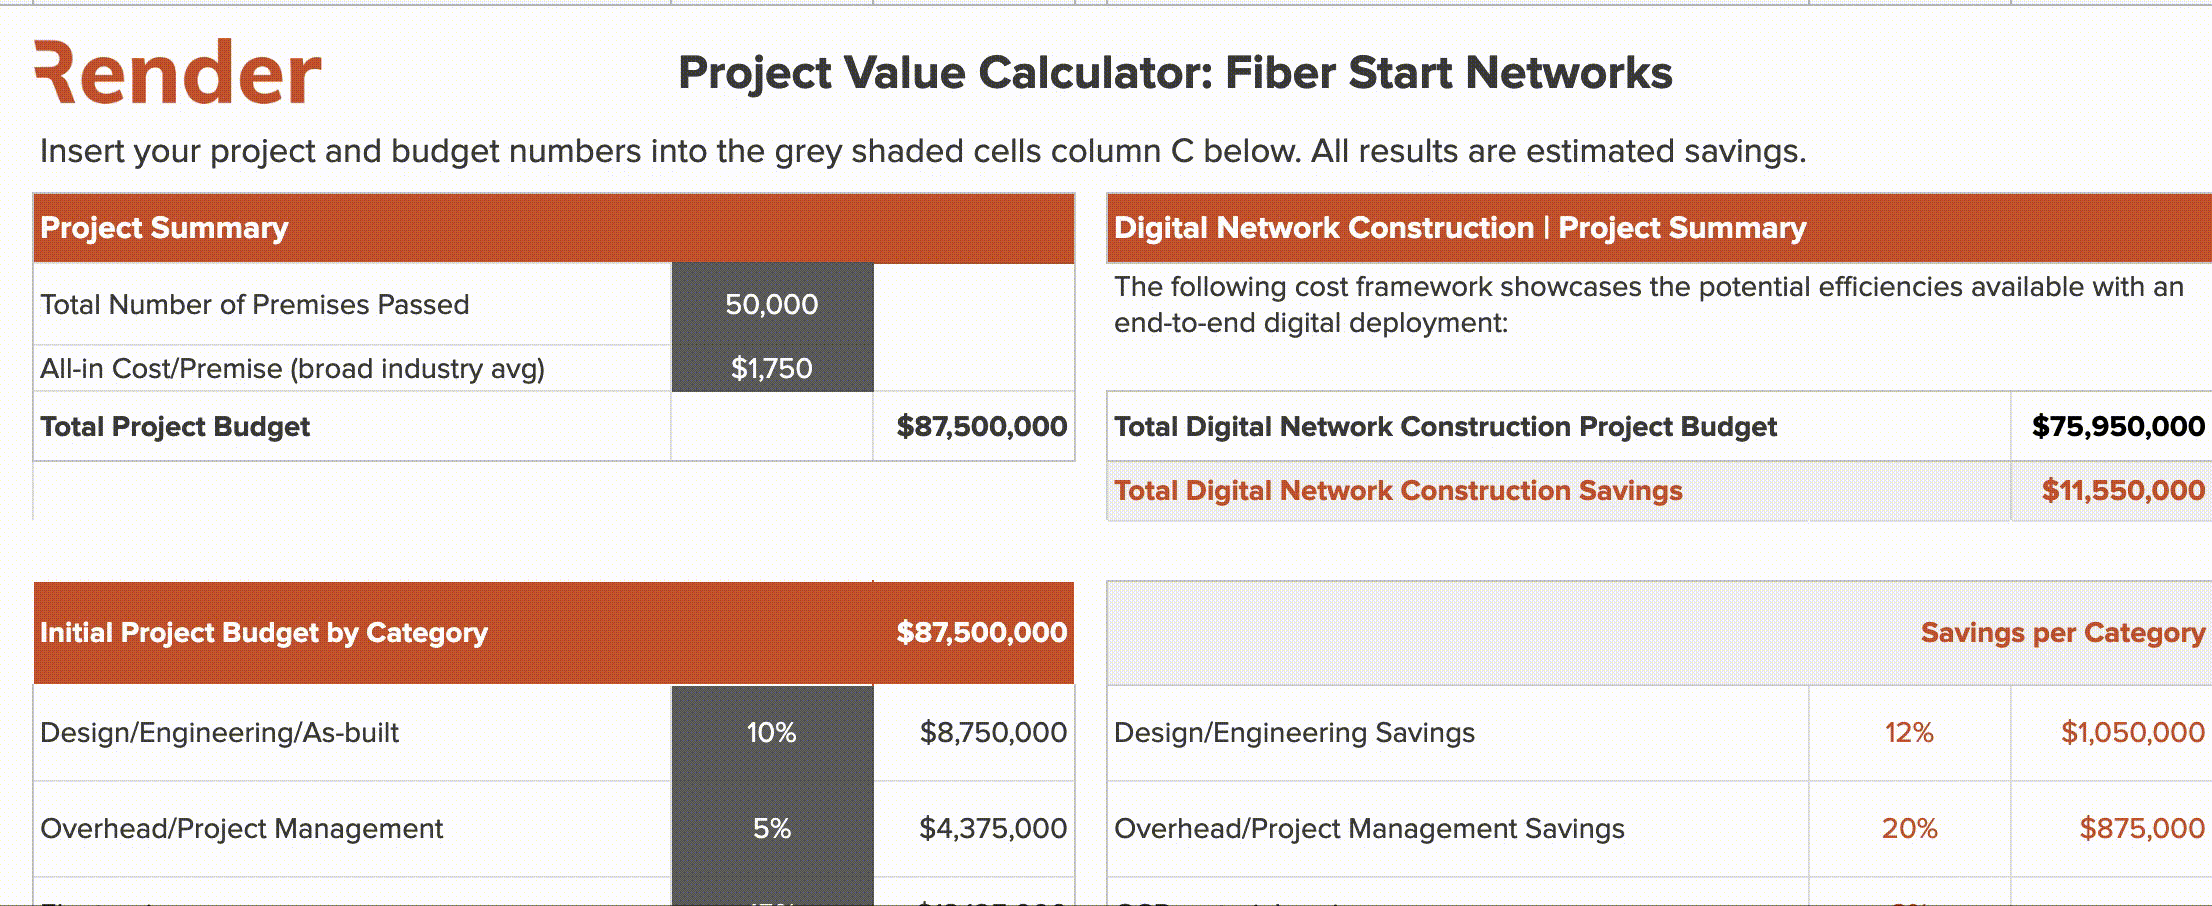 [Free template] Construction budget tool for network rollouts